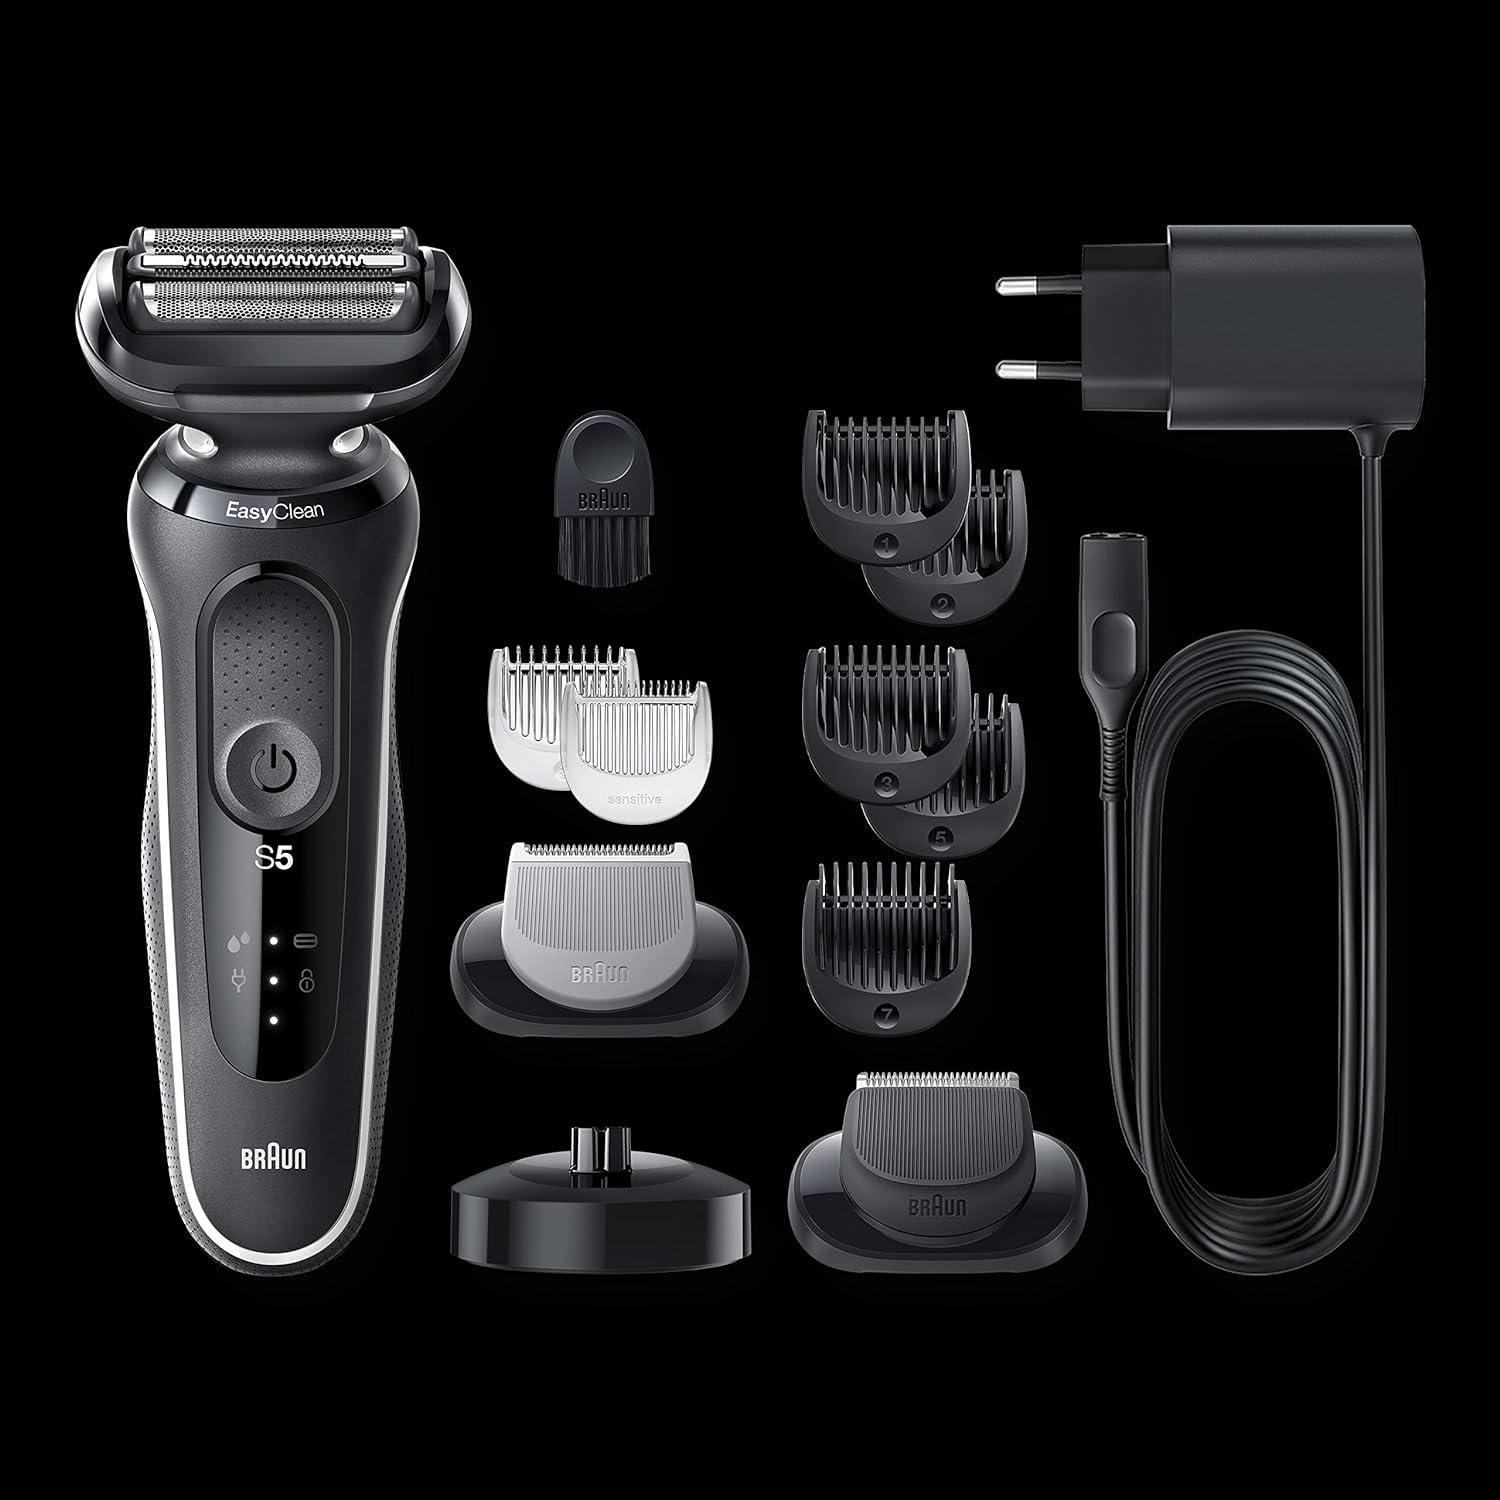 Braun Shaver Series 5 51-W4650cs Wet & Dry and attachments